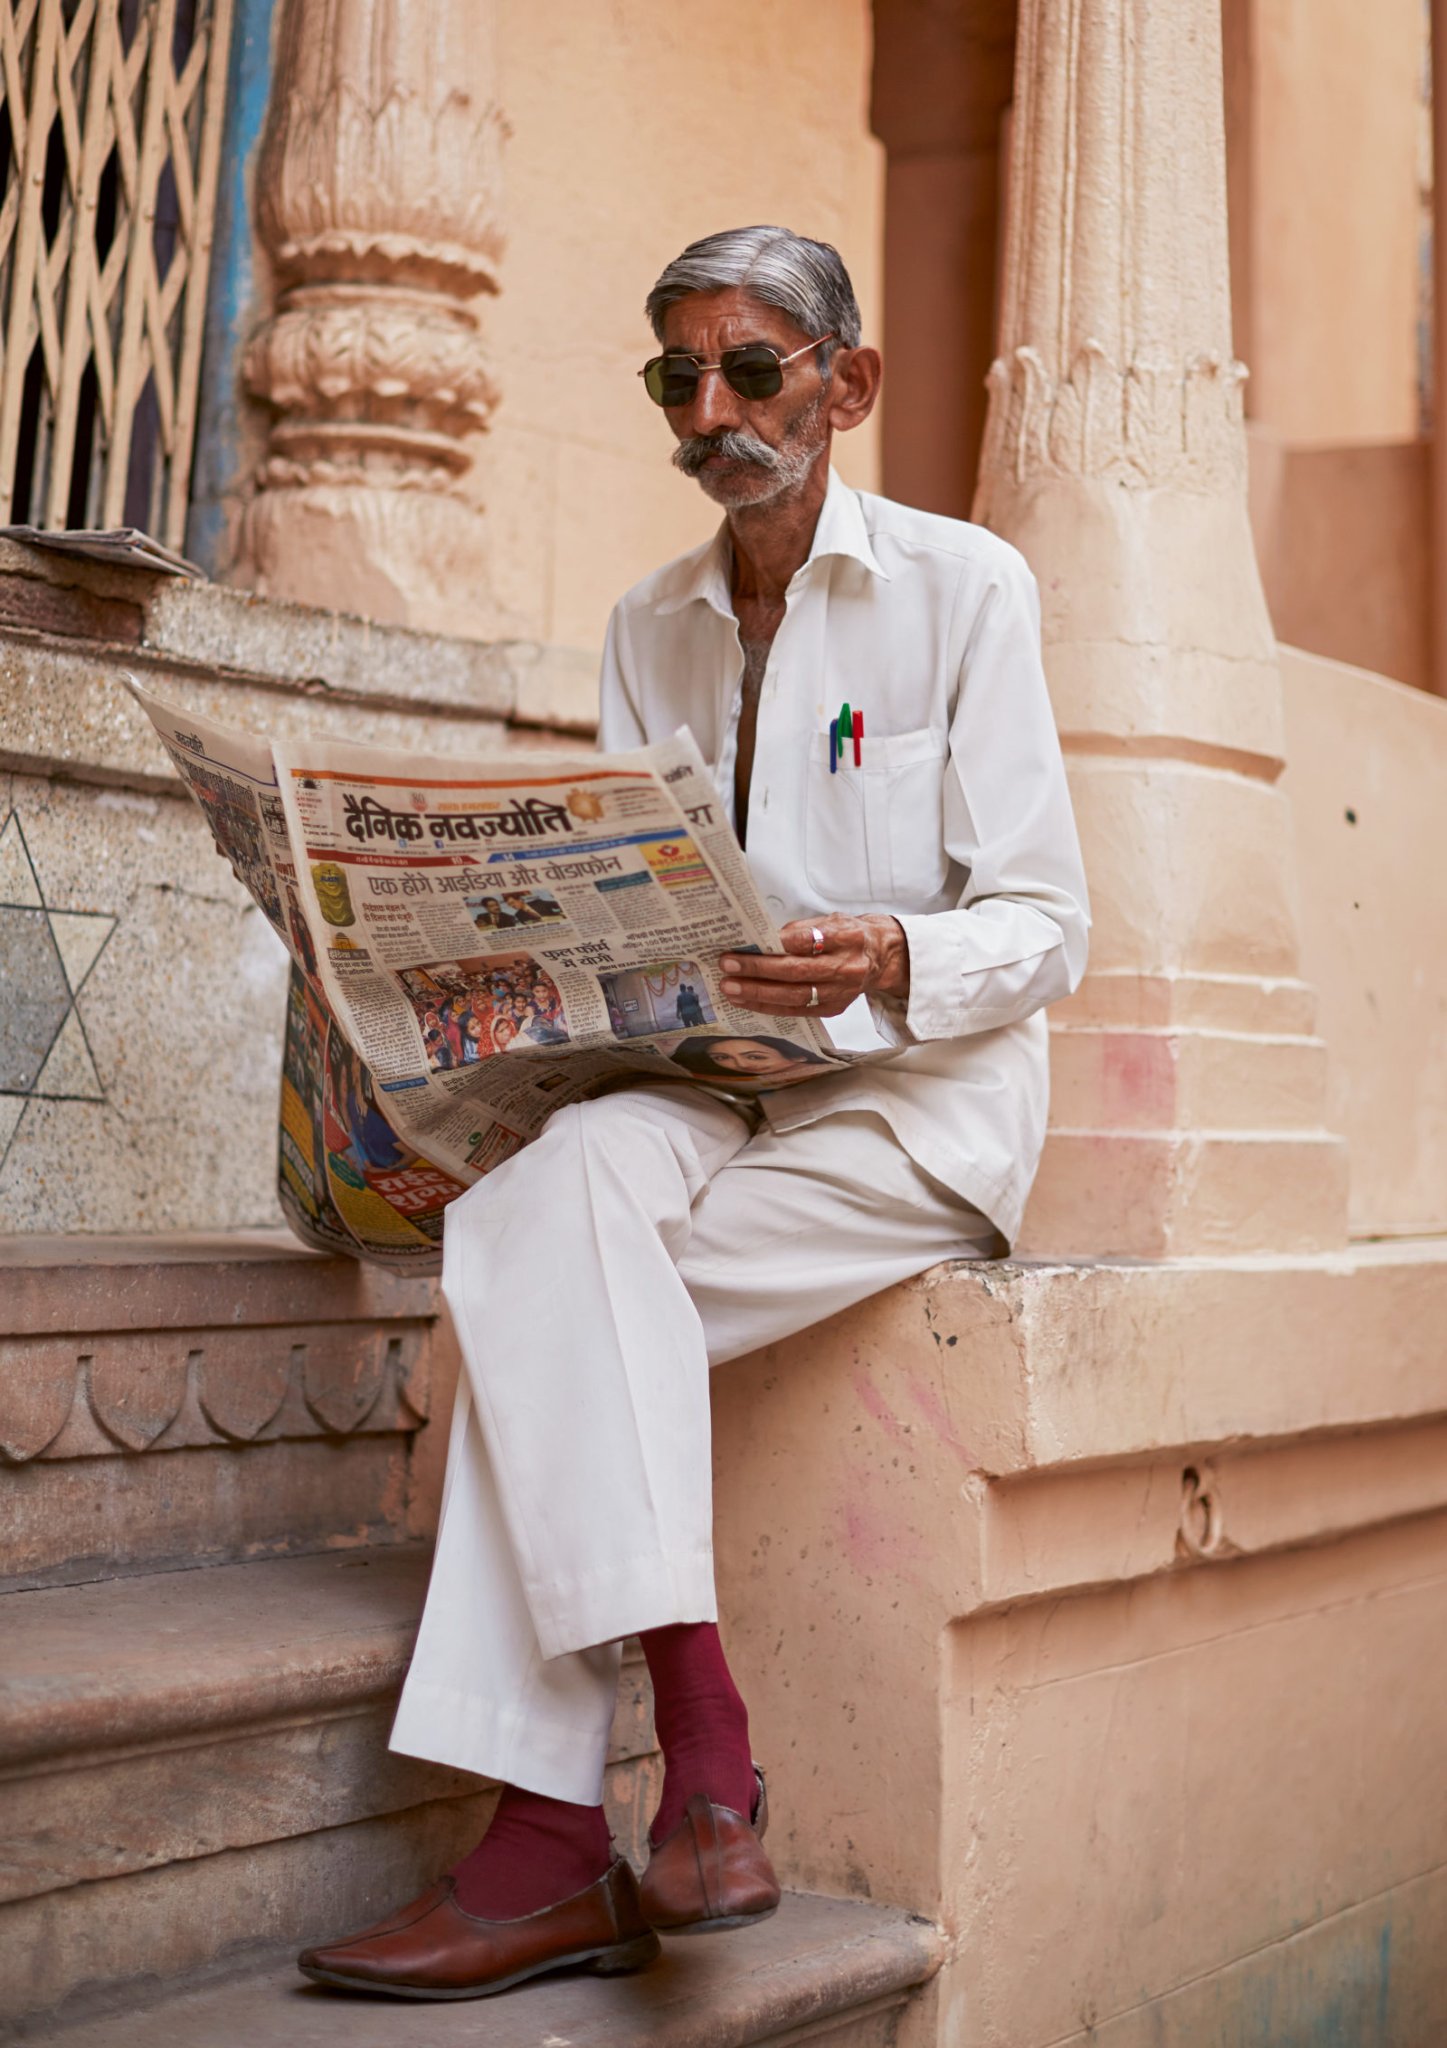 The Sartorialist Turns a Lens to India’s Street Fashion